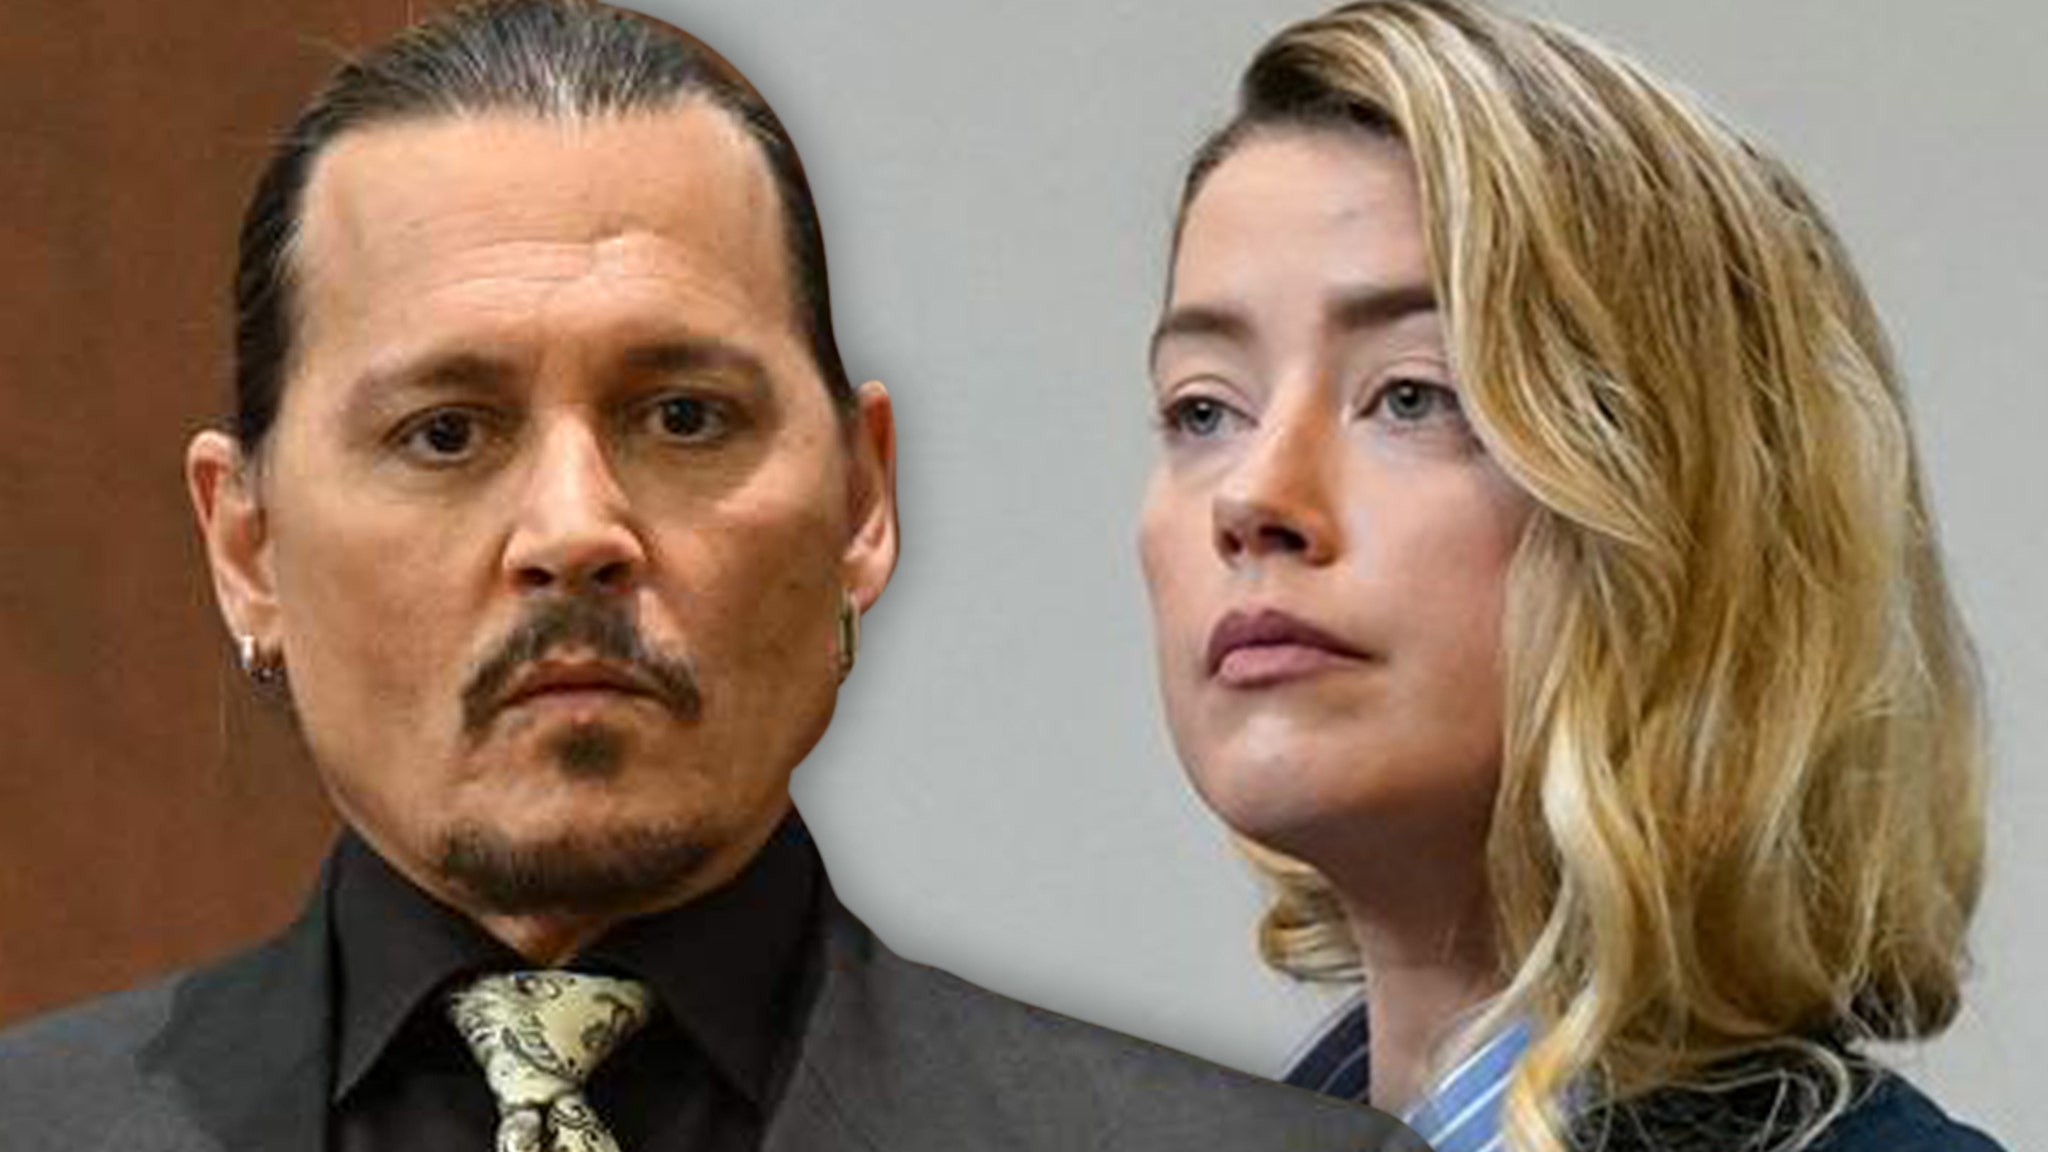 Johnny Depp and Amber Heard Trial Sees Court Take Measures to Keep Them Apart